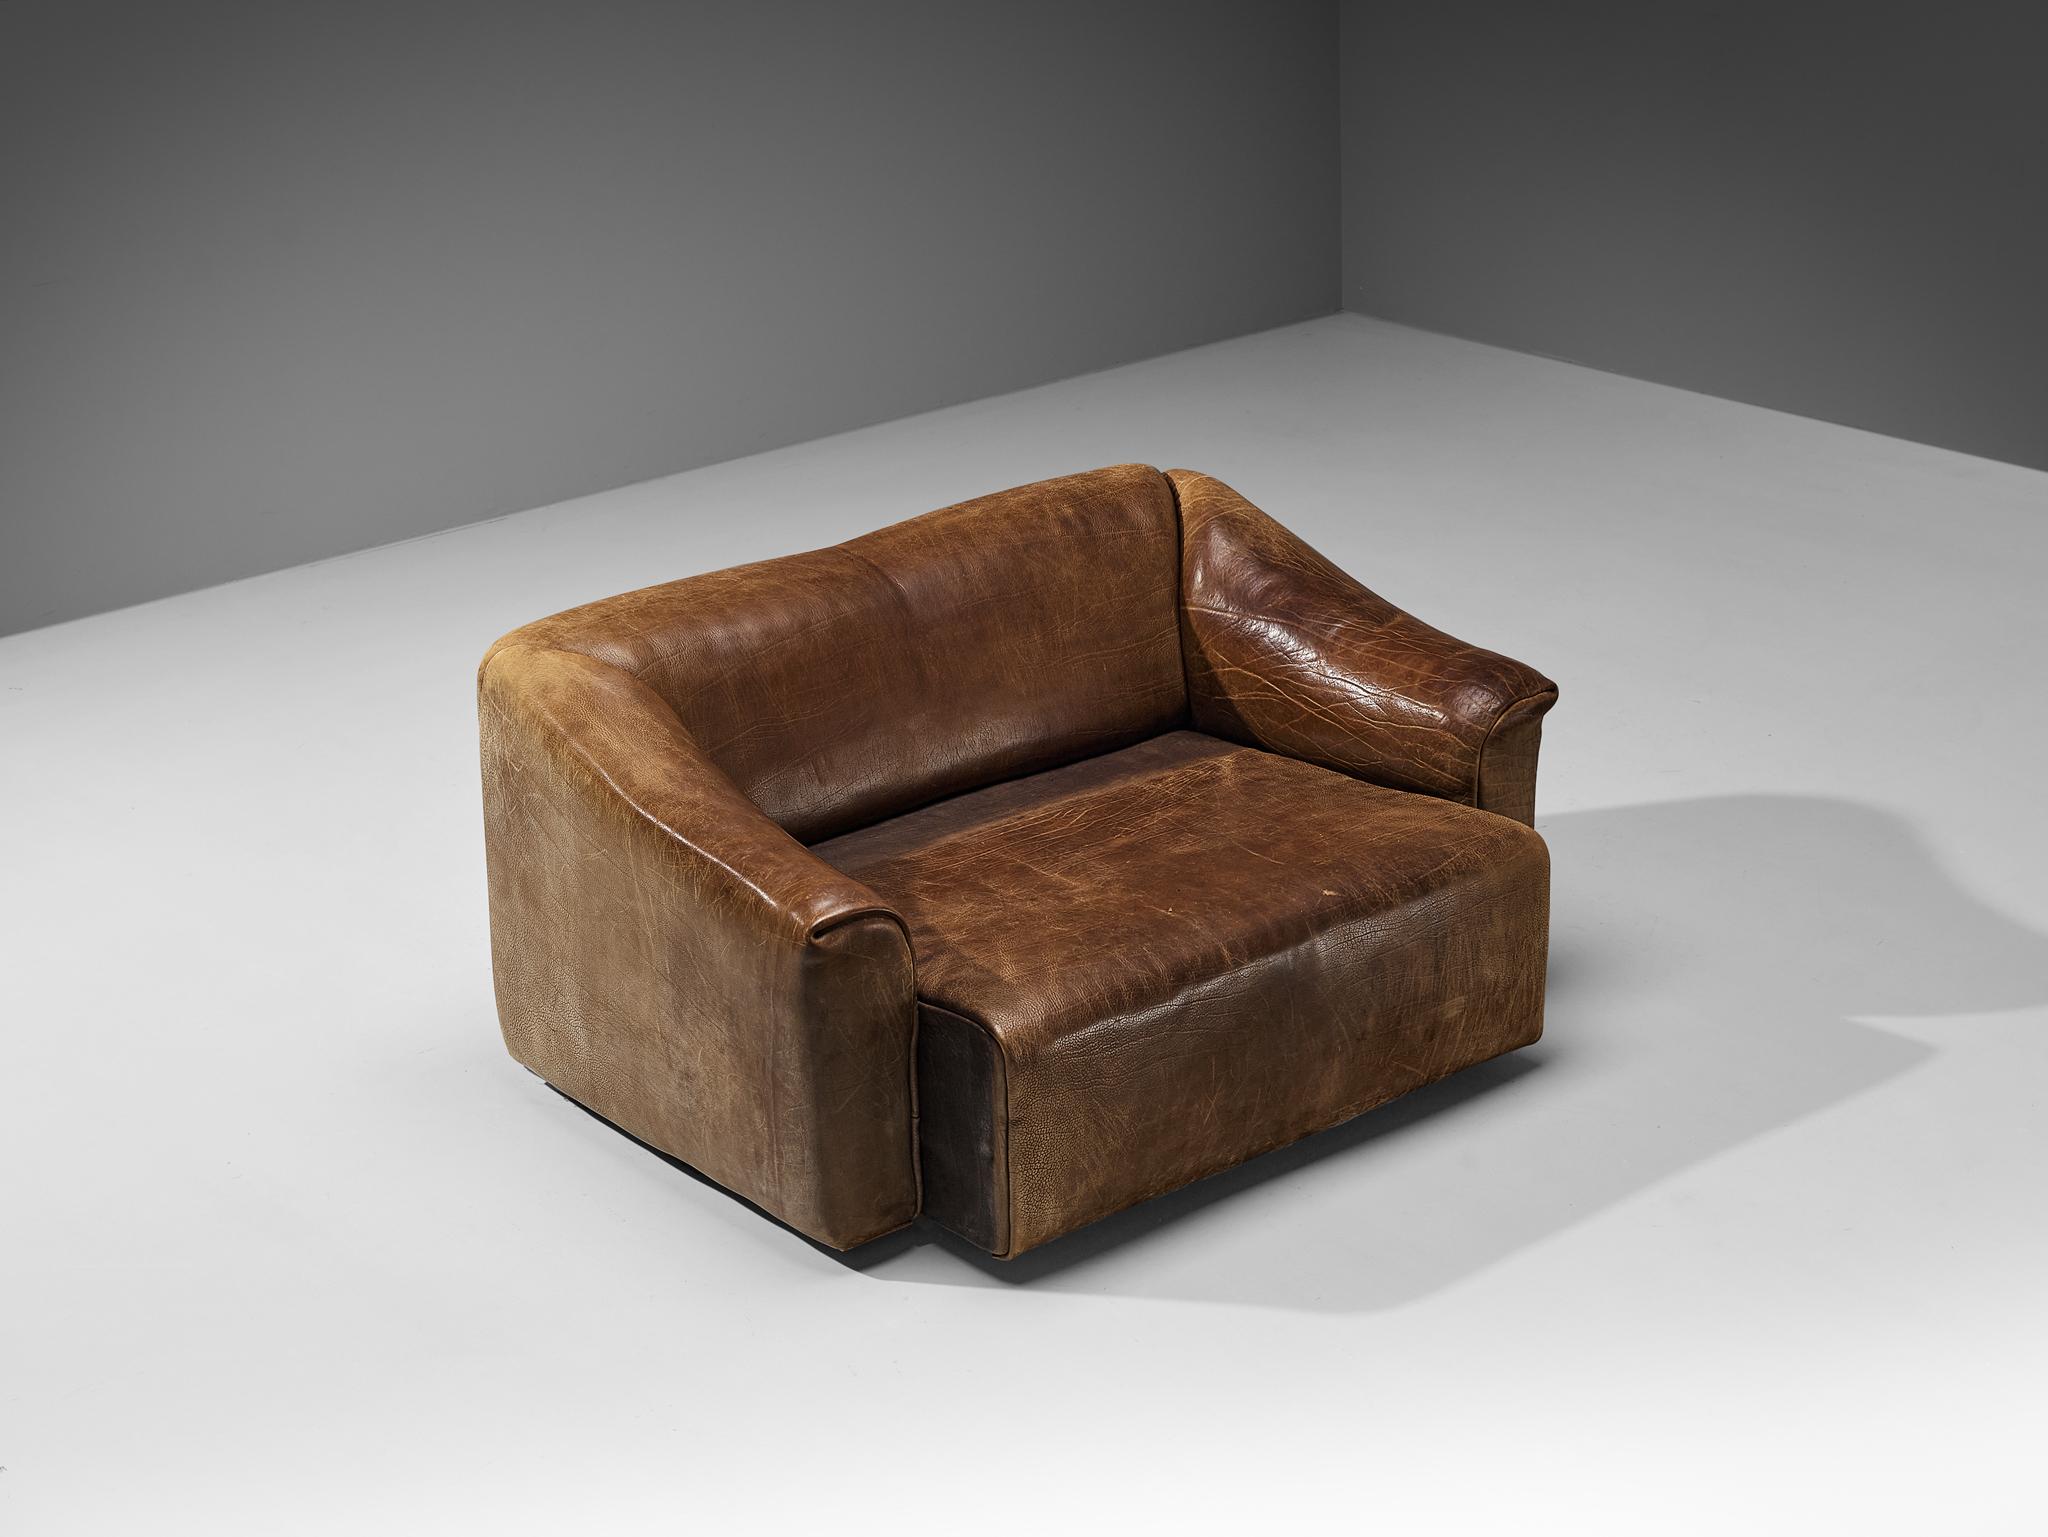 De Sede, 'DS-47' sofa, leather, Switzerland, 1970s.

Highly comfortable DS47 sofa in a patinated cognac brown leather by De Sede. The design is simplistic, yet very modern. This design is slightly curved in its form, which emphasizes the comfortable